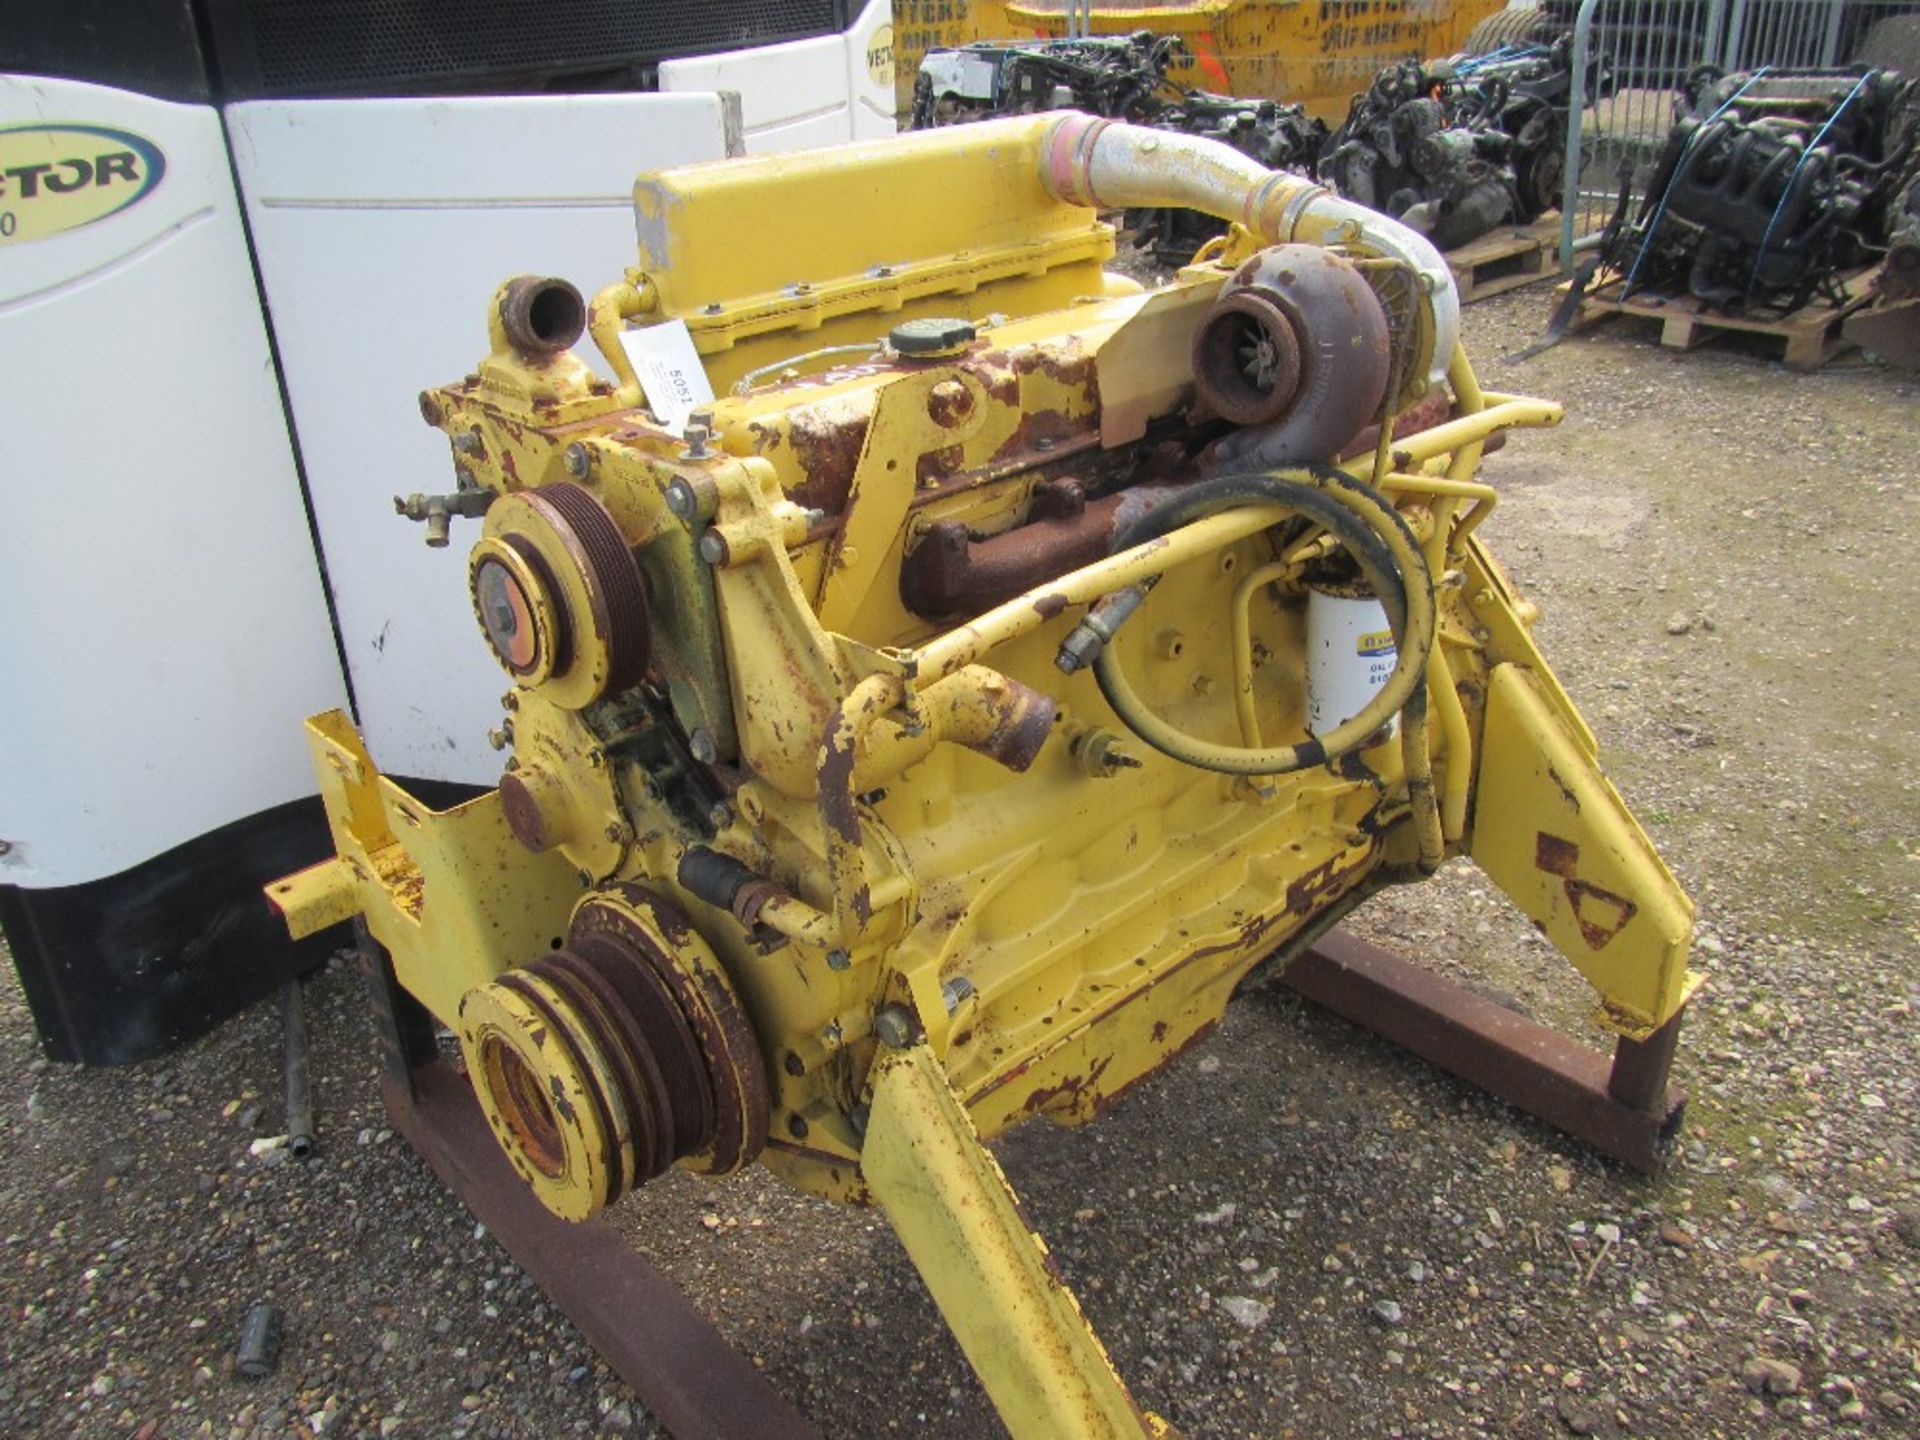 New Holland TX66 Combine Harvester Engine (Ford 675 ta-3) - Image 2 of 2